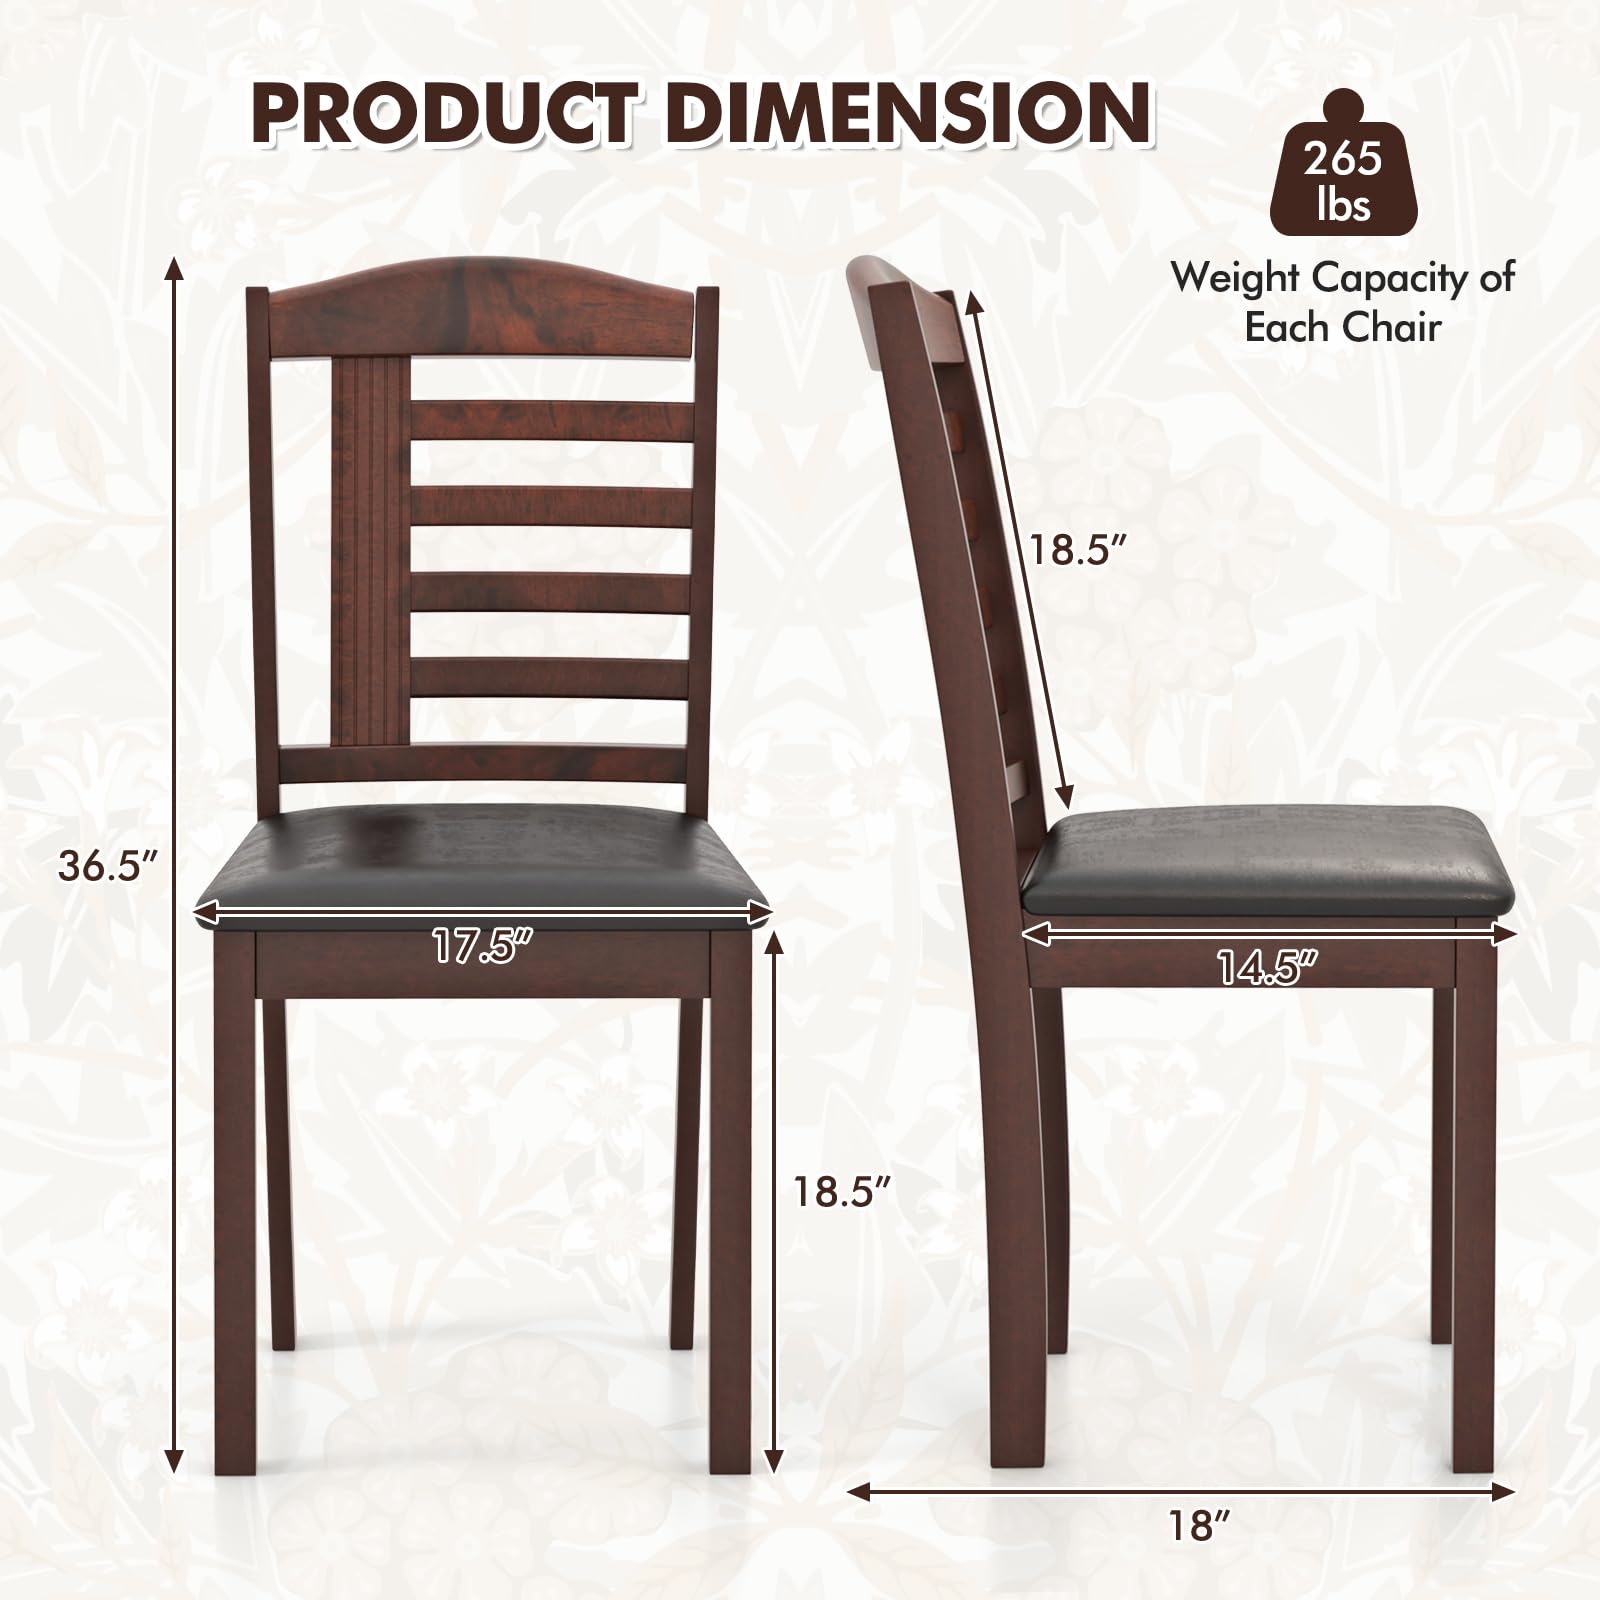 Giantex Wooden Dining Chair, PU Leather Upholstered Kitchen Chairs w/Padded Seat